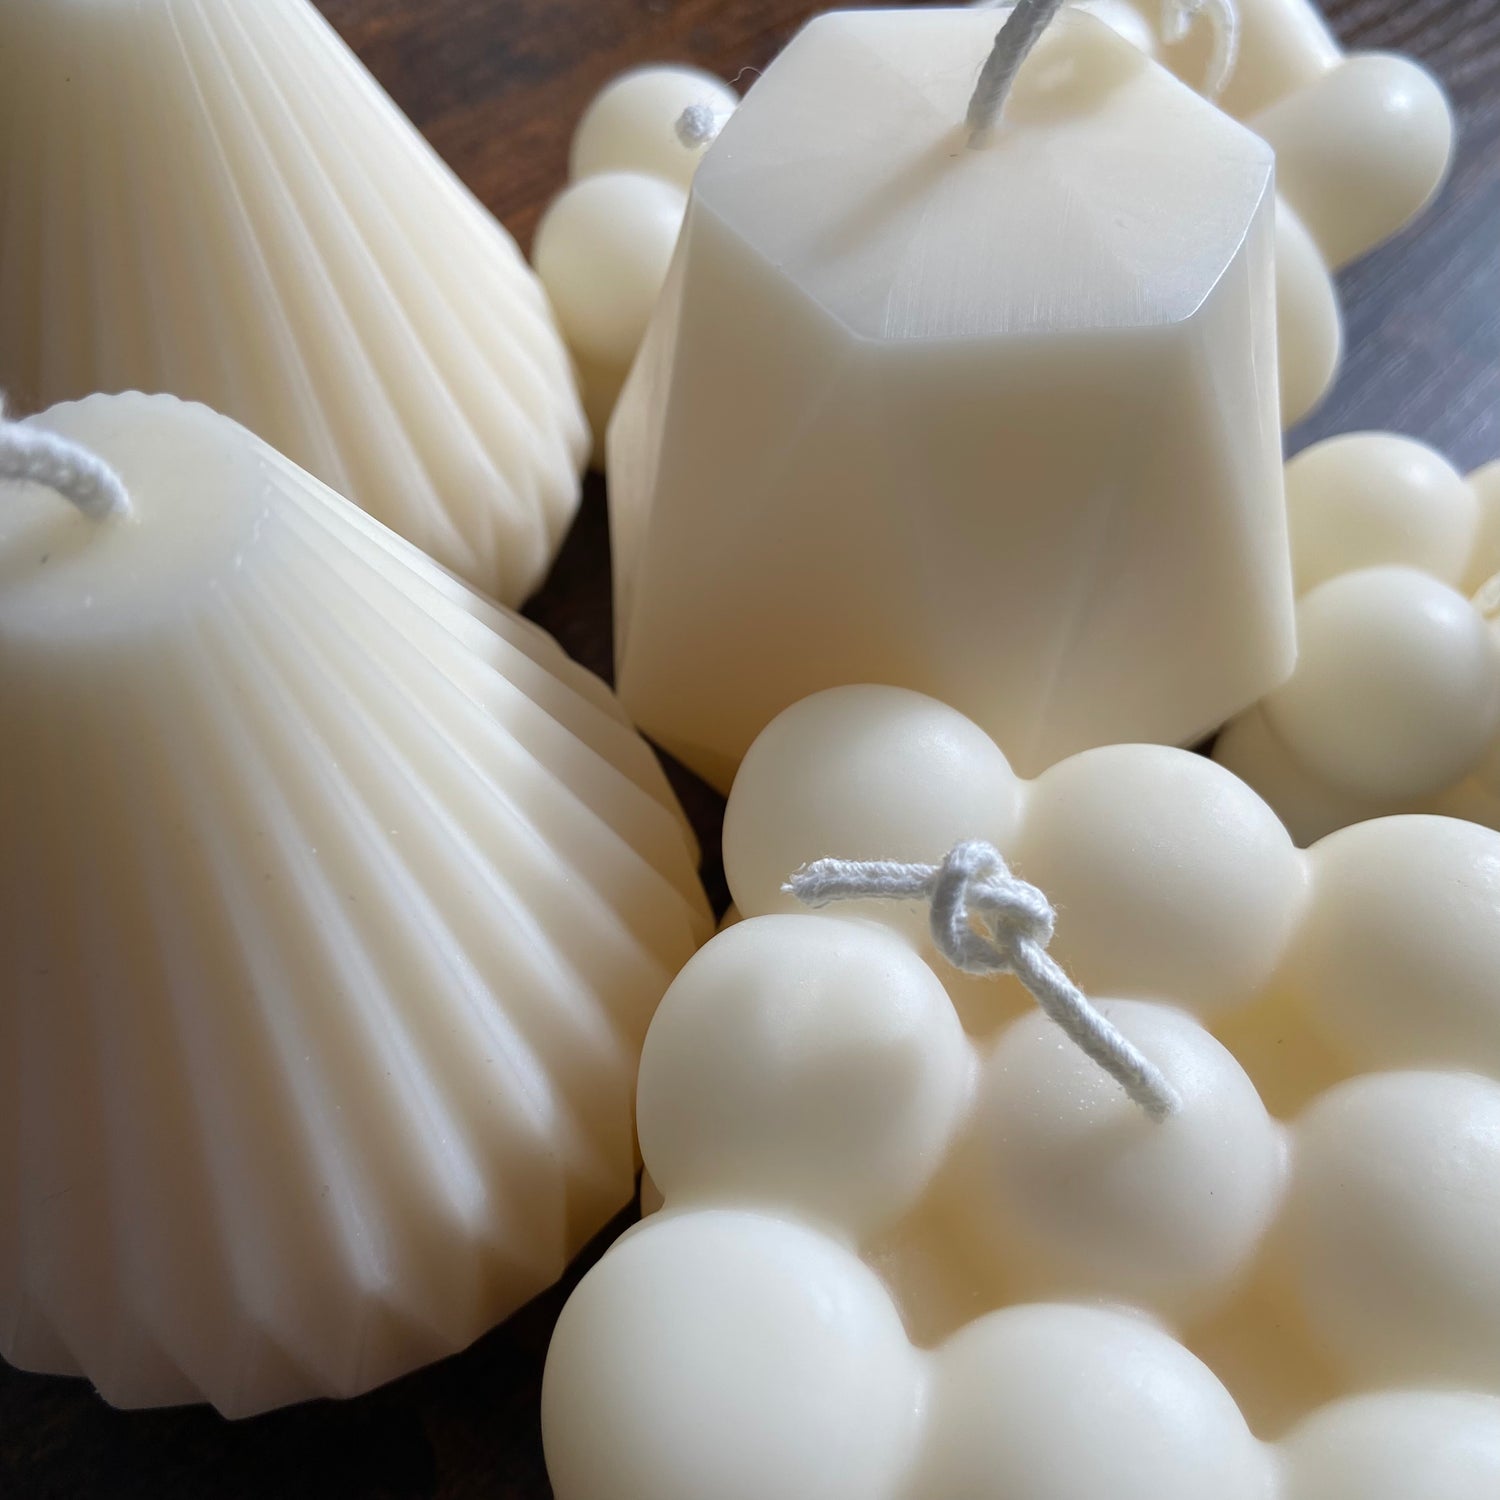 Ivory soy wax  sculptural candles